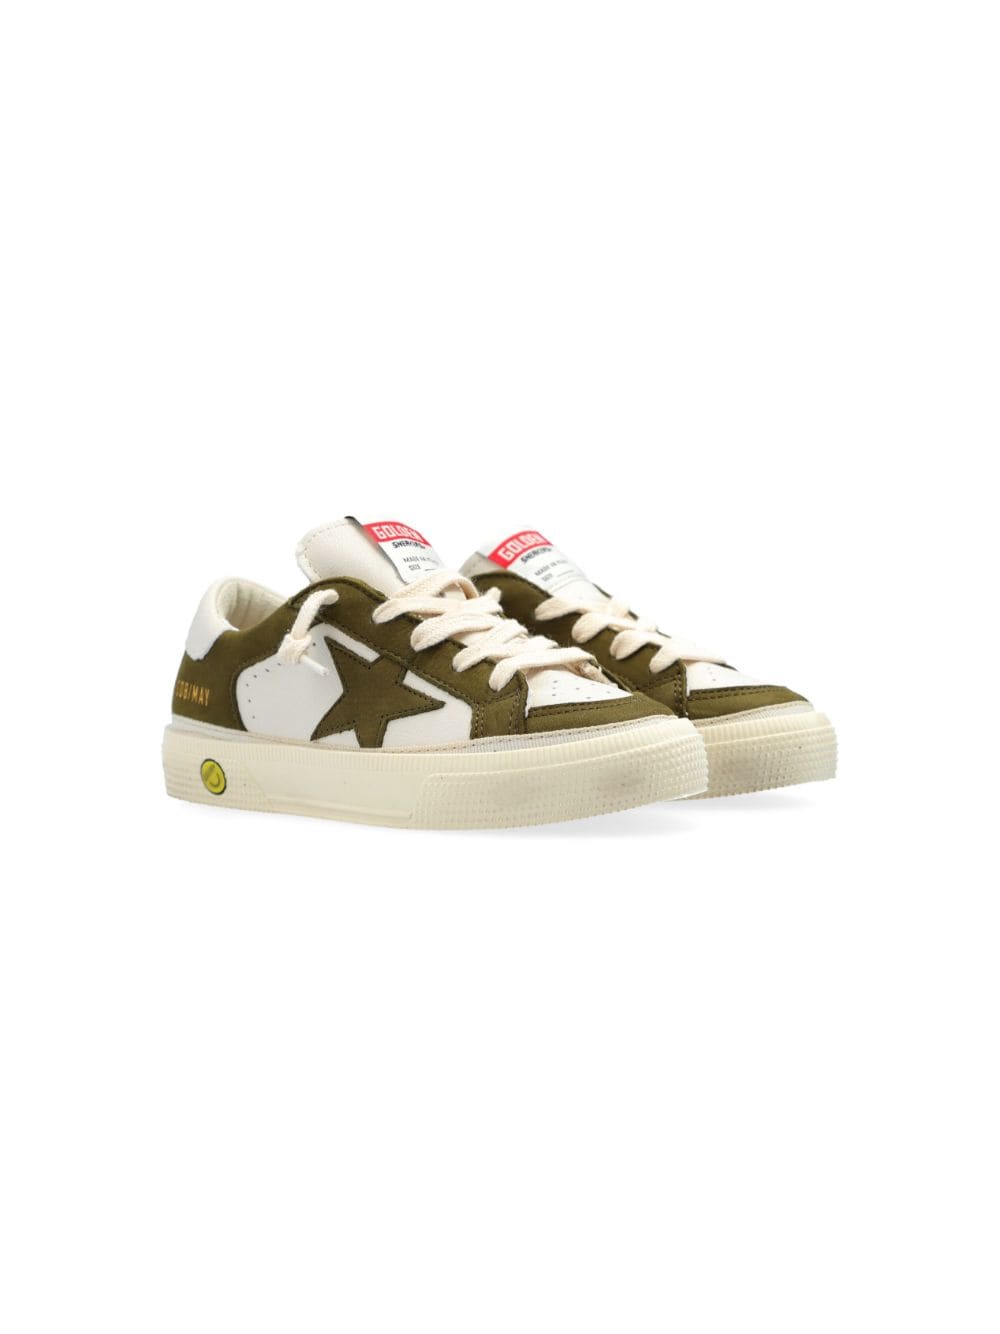 Golden Goose Kids May leather sneakers - White von Golden Goose Kids